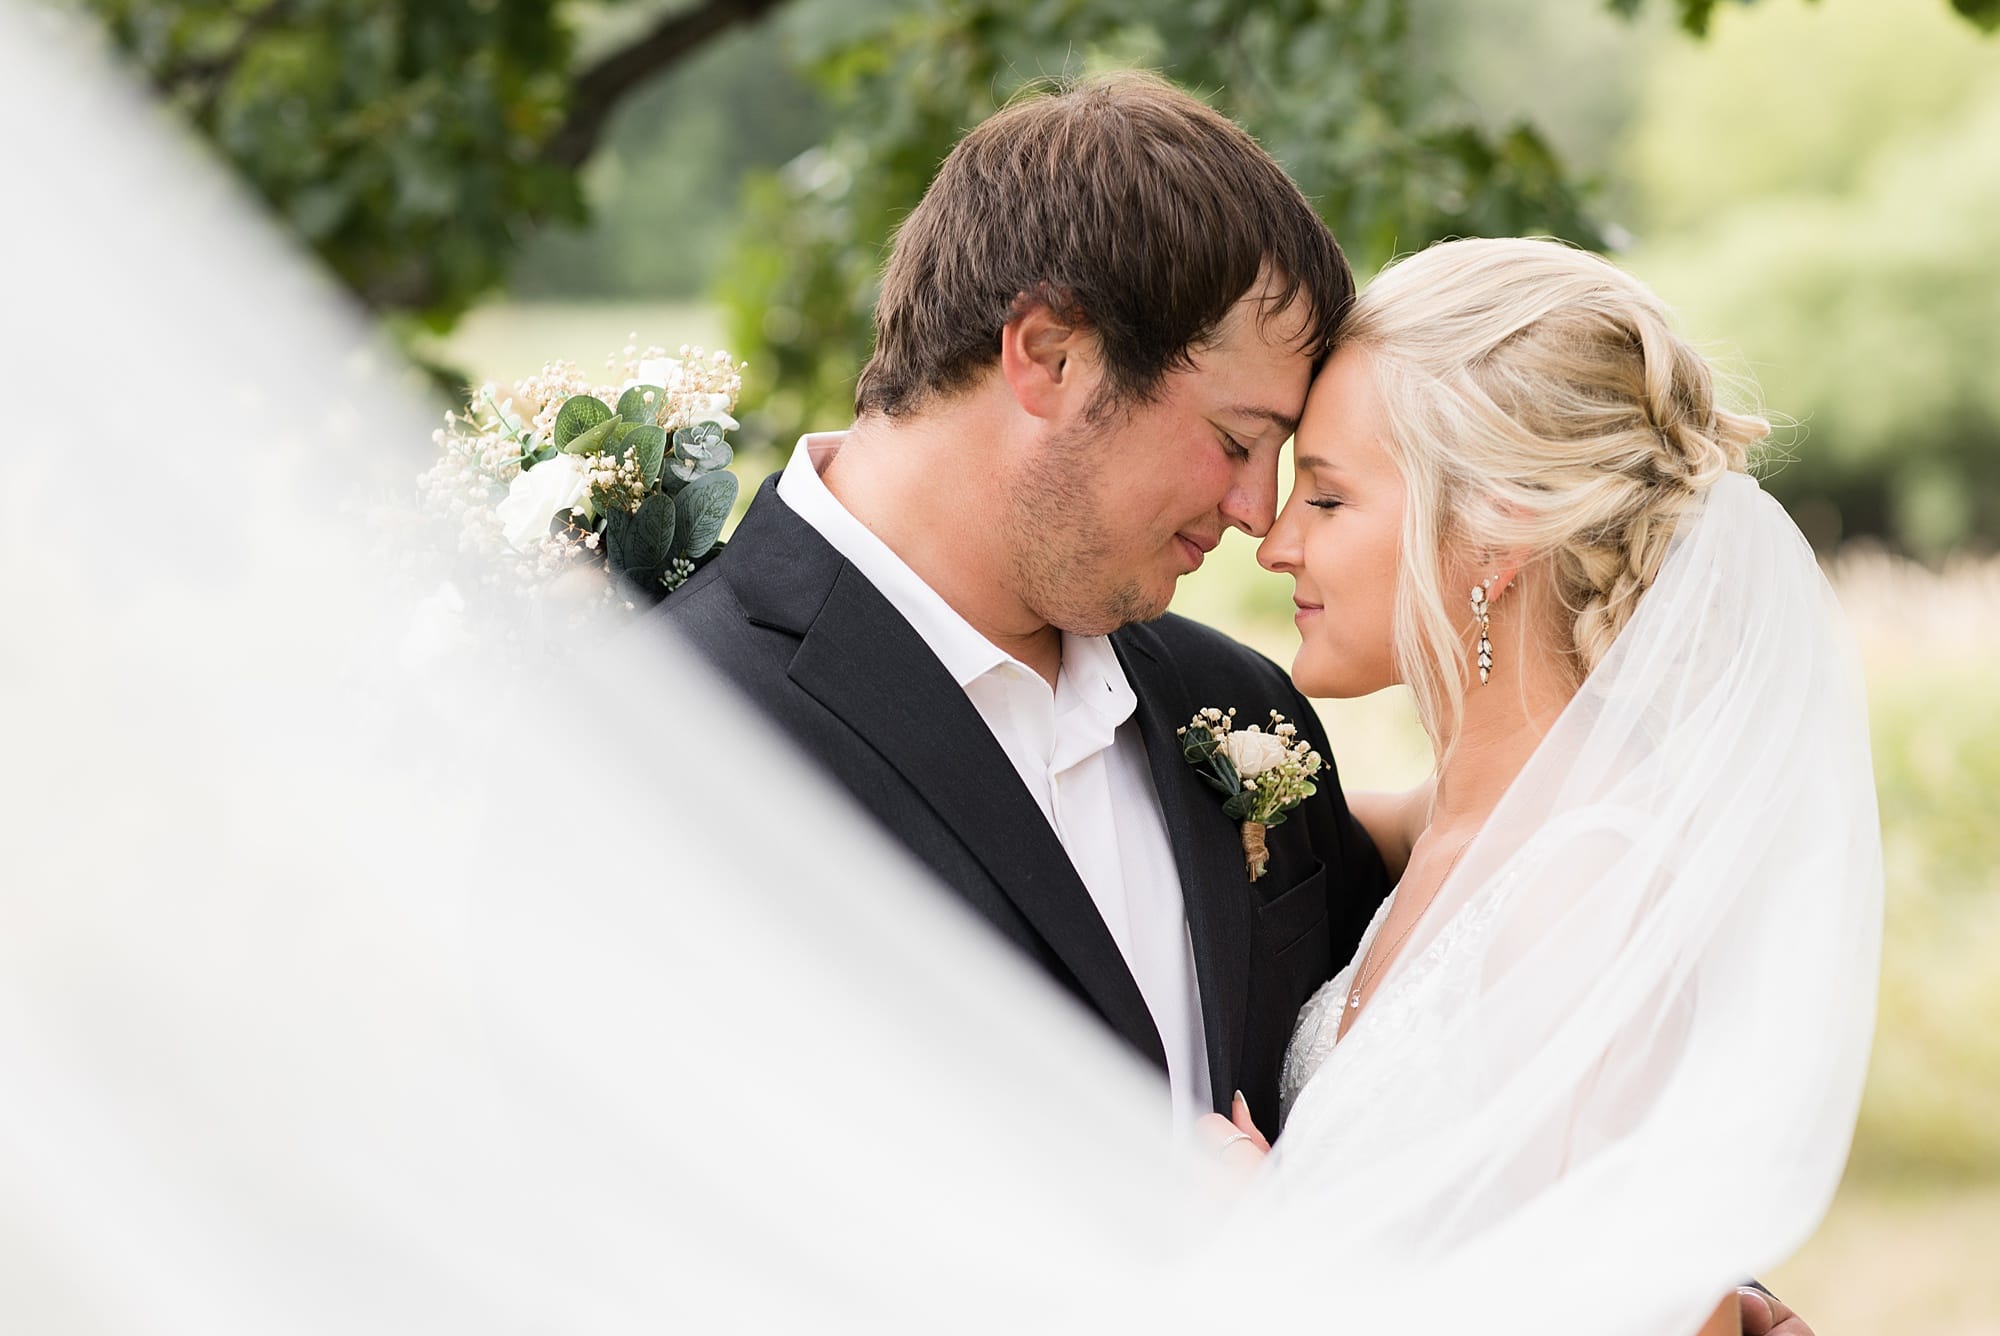 A bride and groom with a veil swoop close their eyes during their portrait session at Rustic Oaks